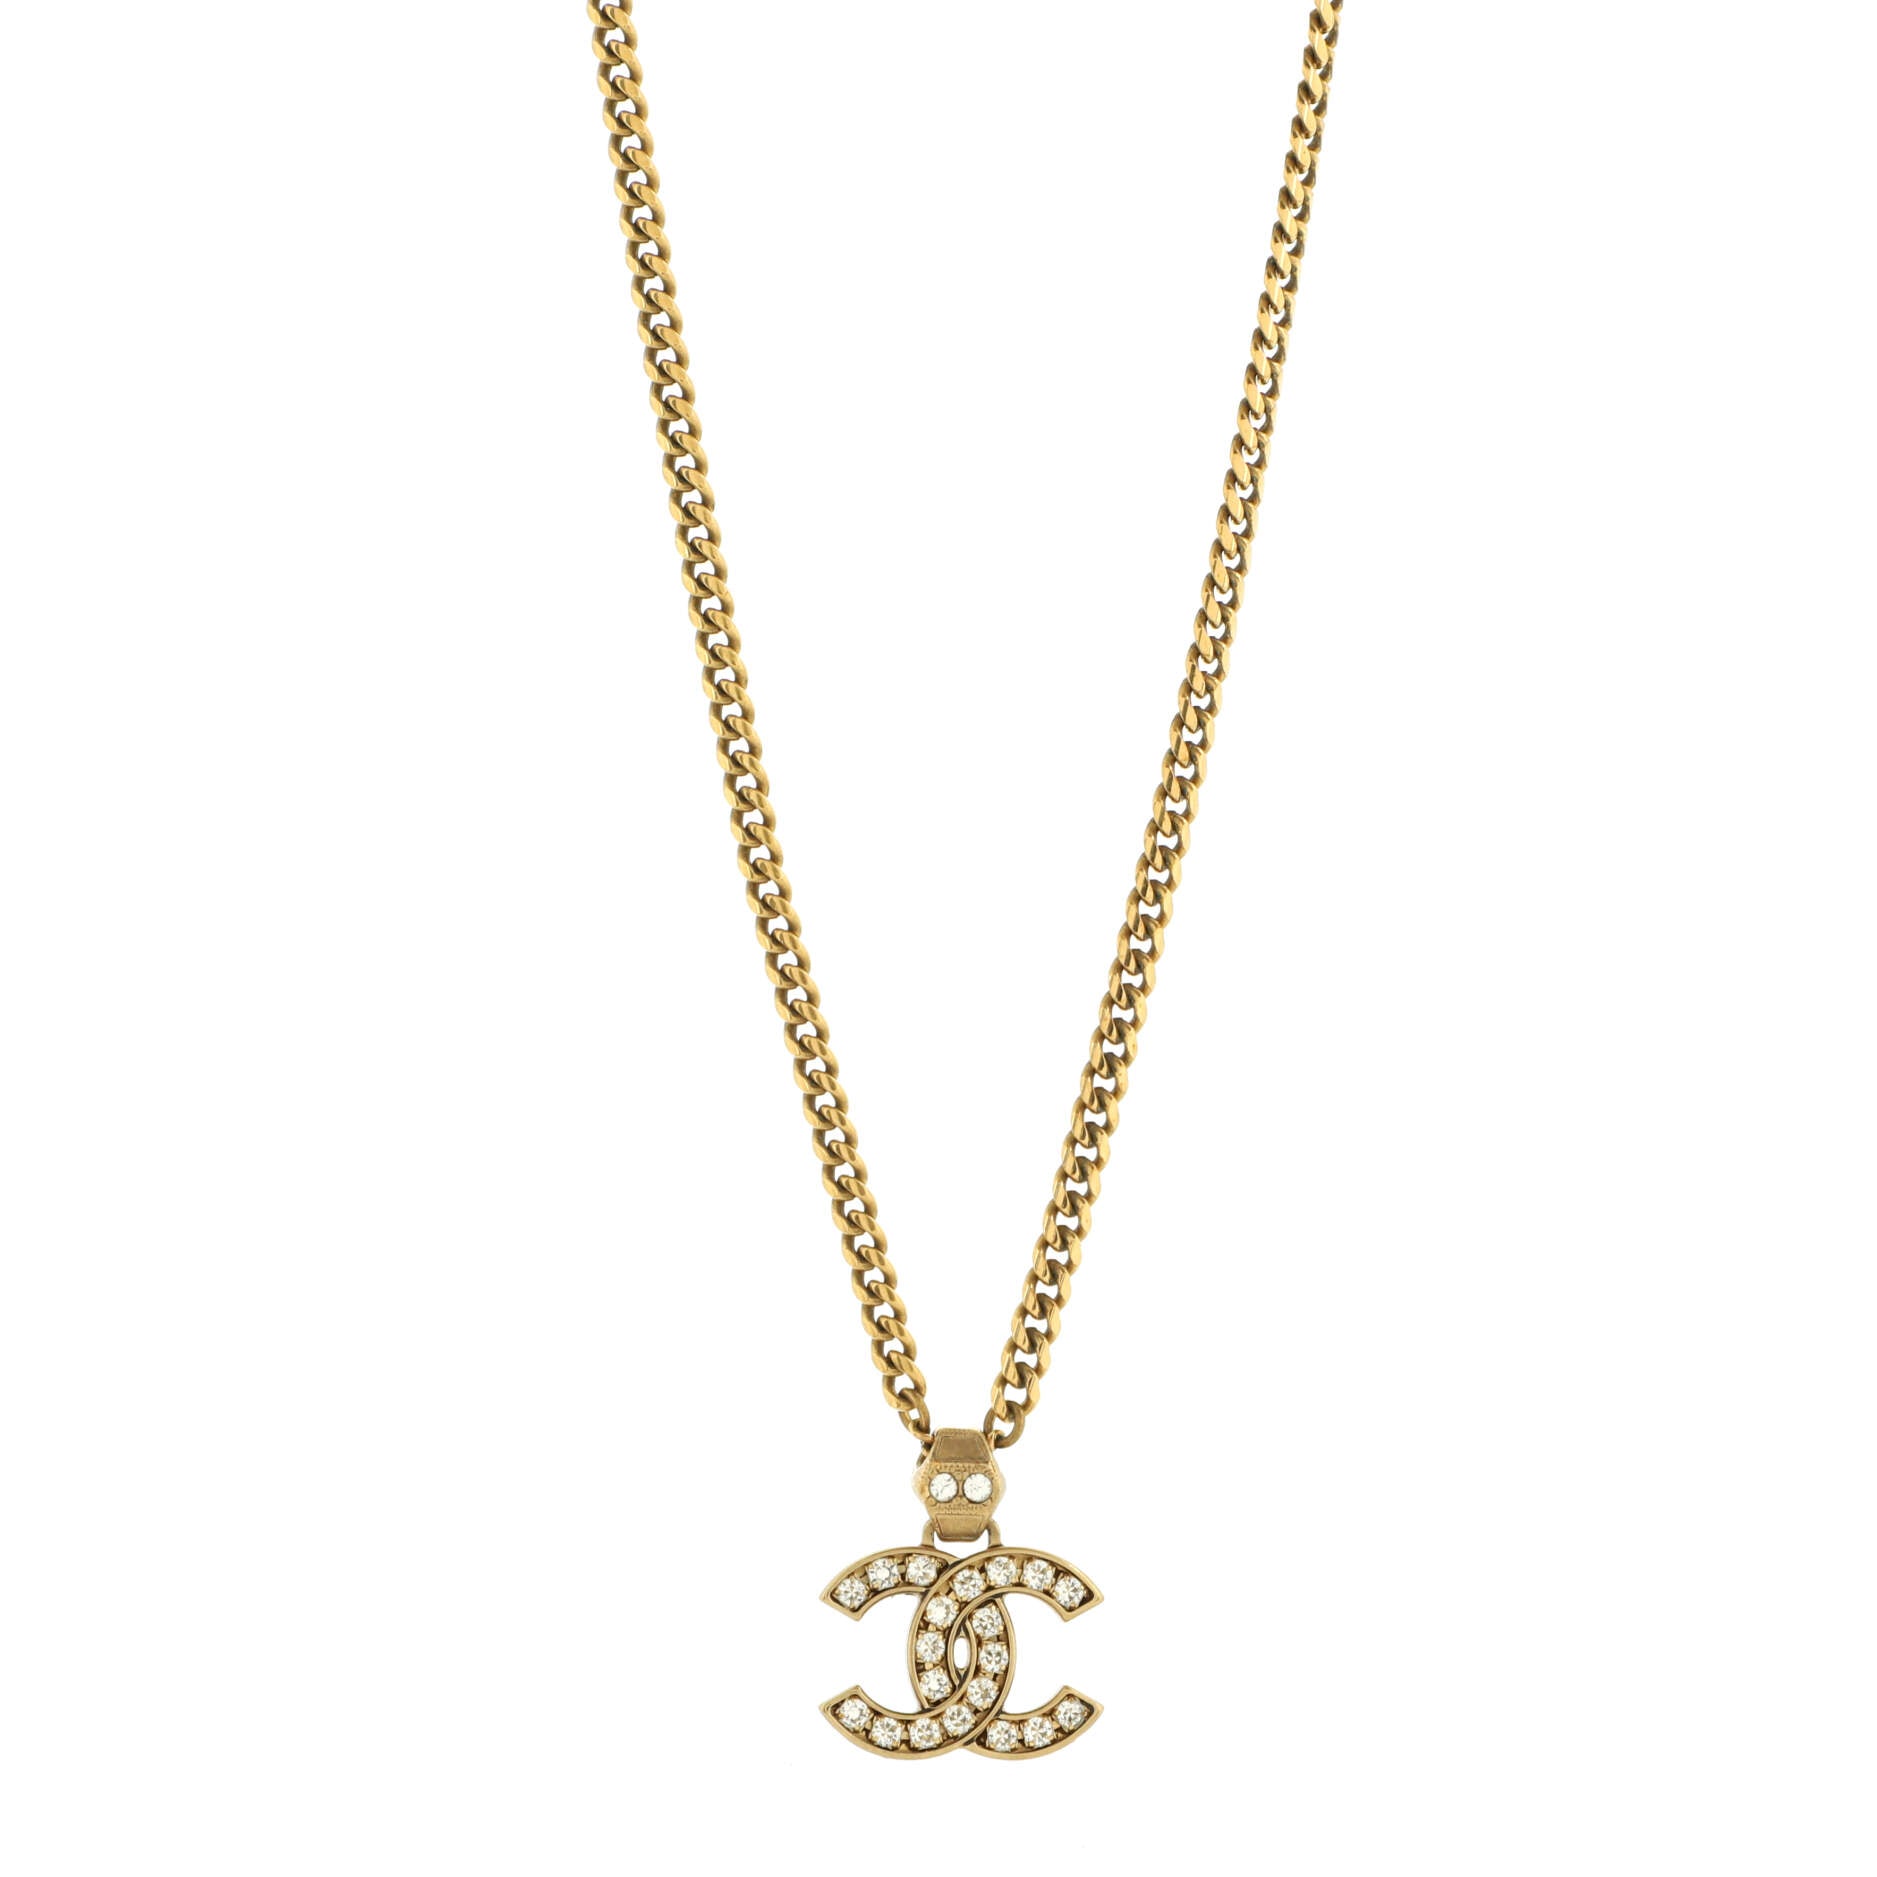 Chanel Pre-owned 1997 CC Turn-Lock Chain Necklace - Gold